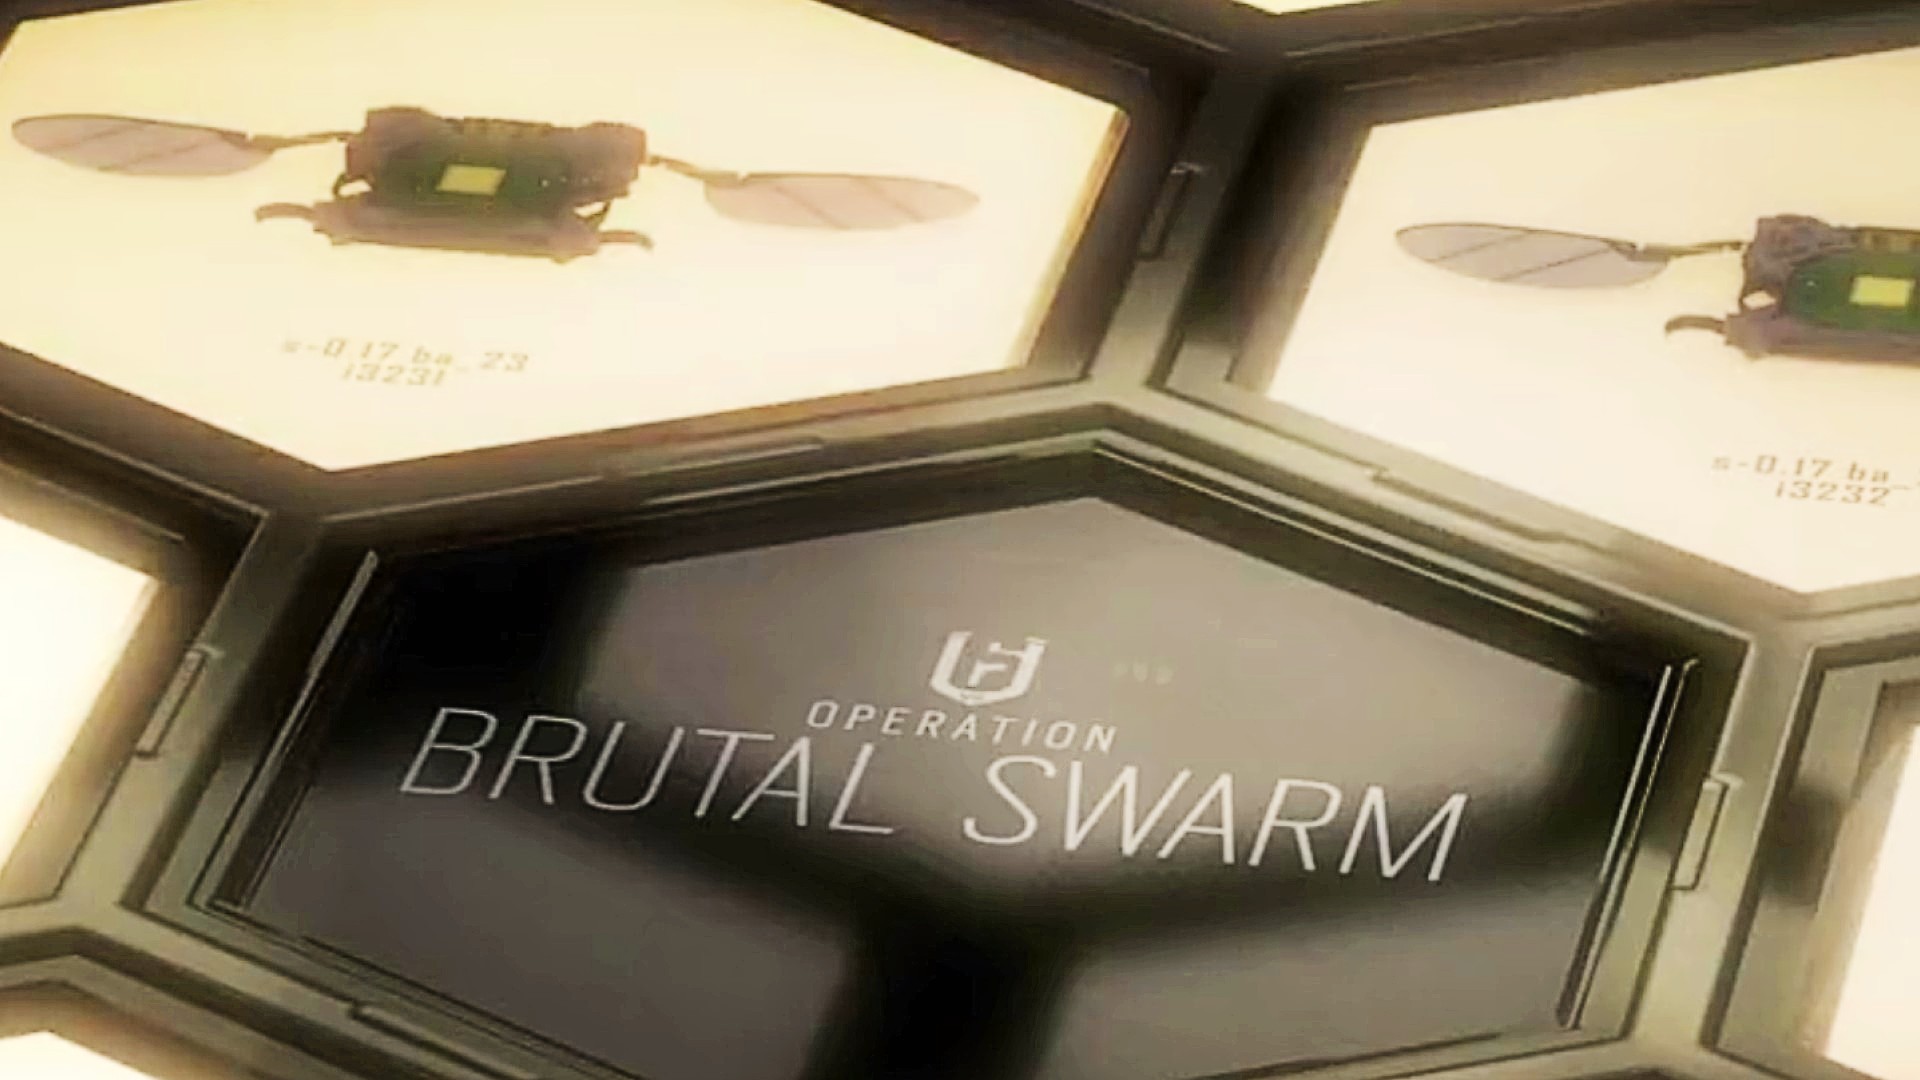 Rainbow Six Siege Operation Brutal Swarm's reveal is coming soon